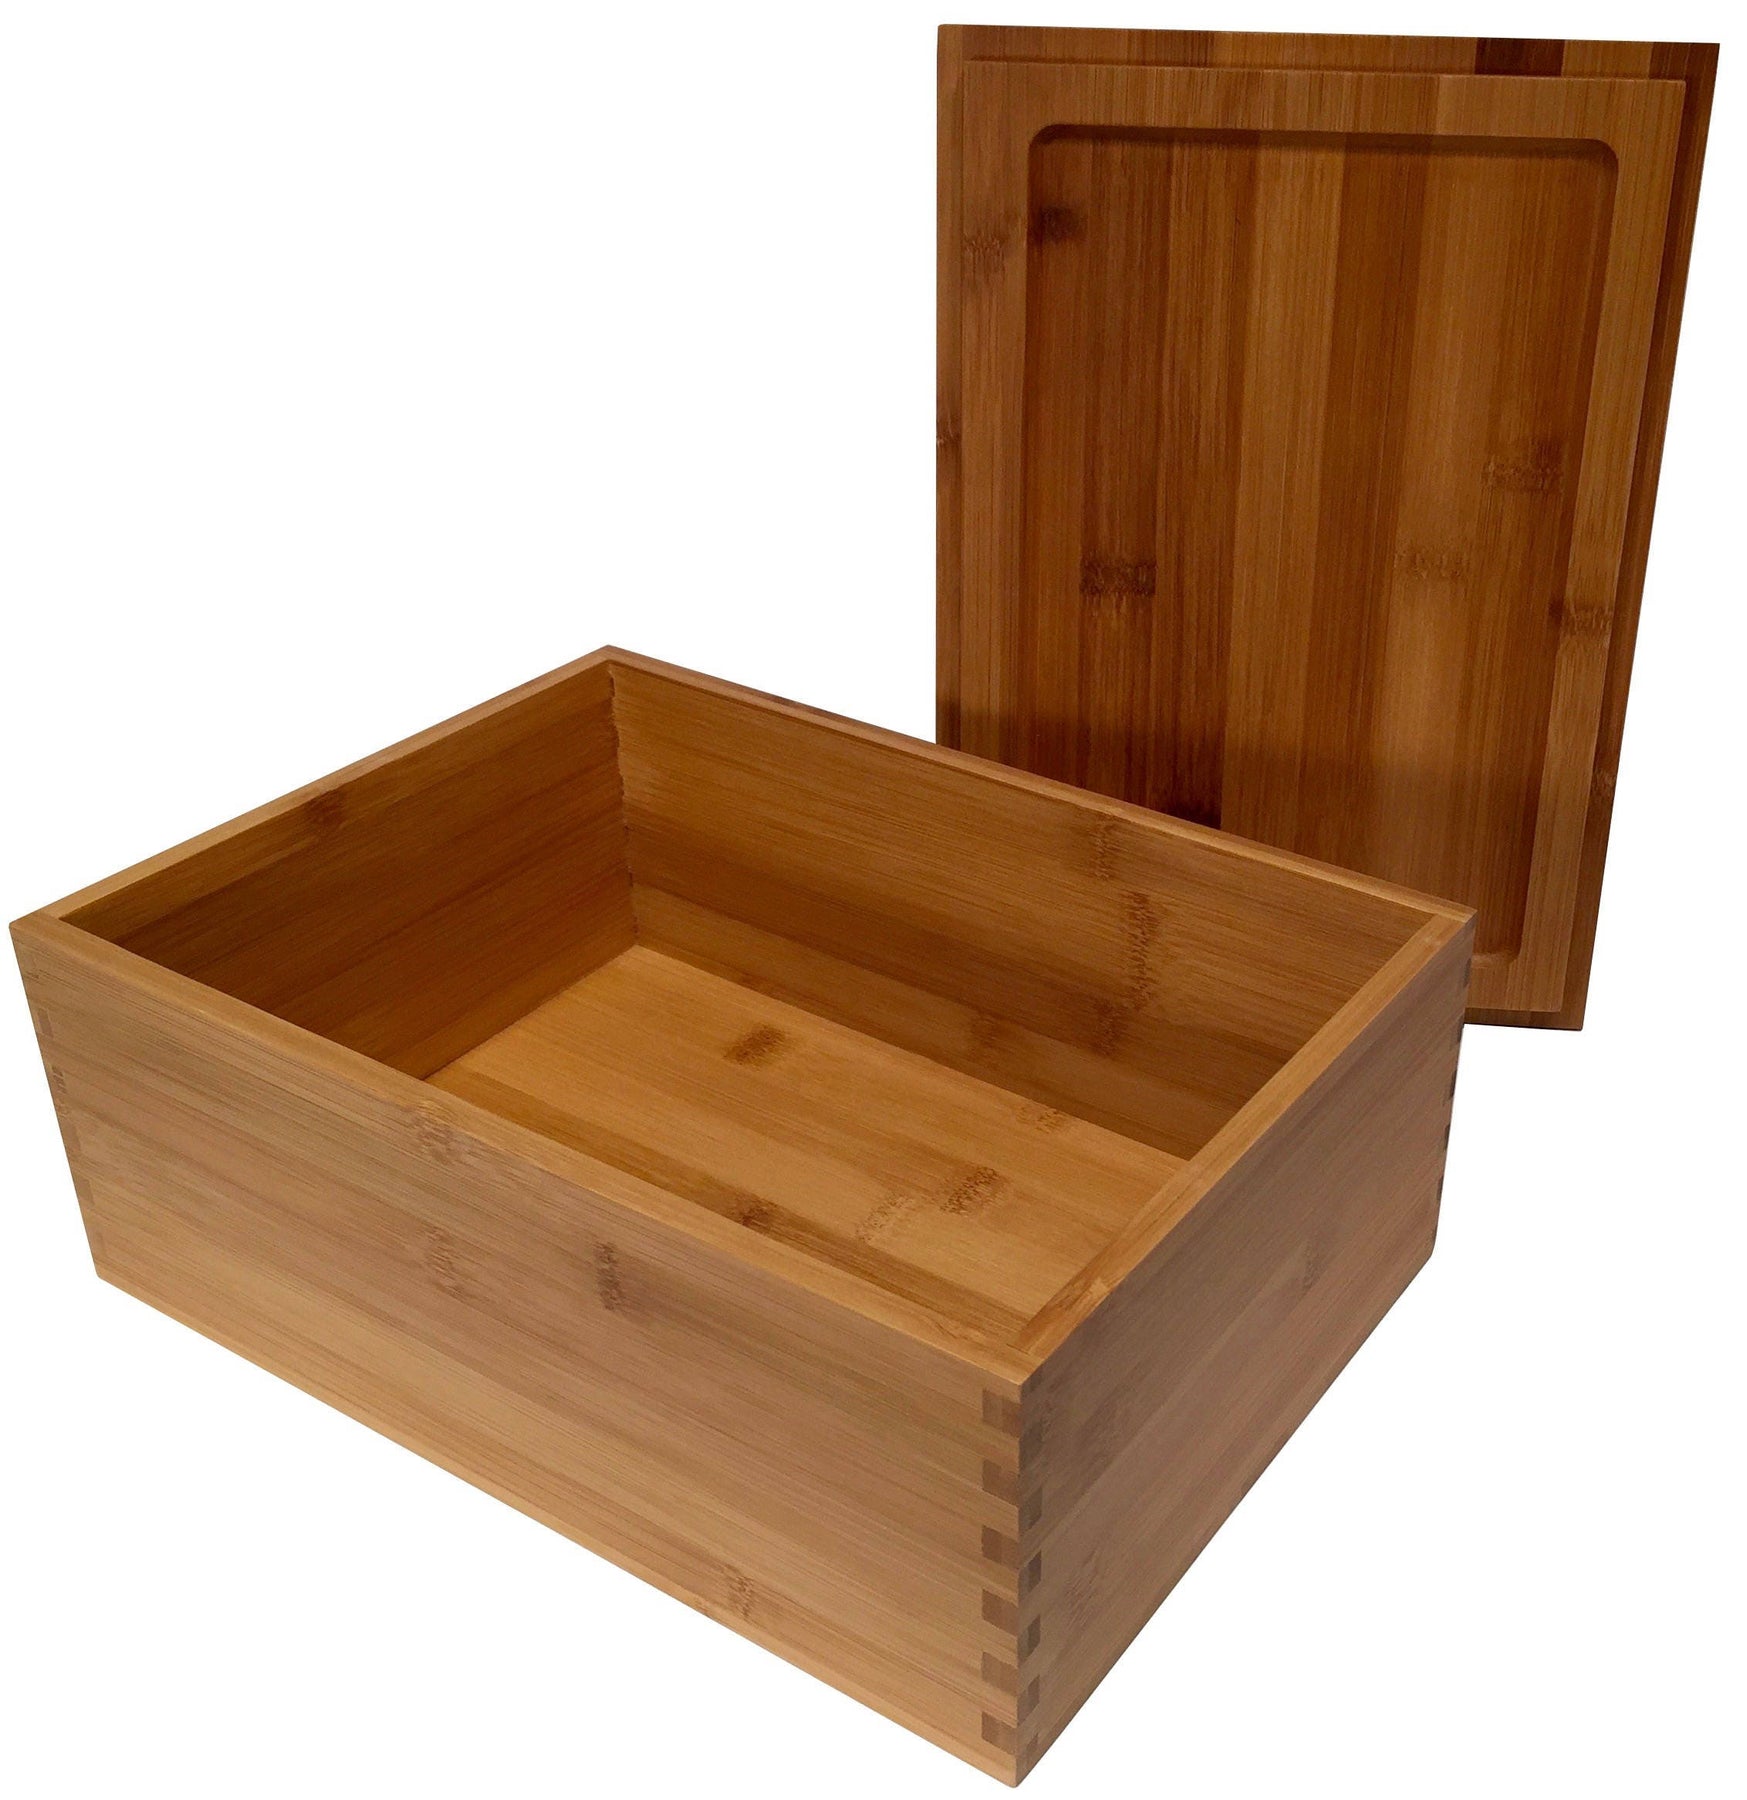 Wooden Storage Box with Hinged Lid and Locking Key, 11 X 8.5 X 5